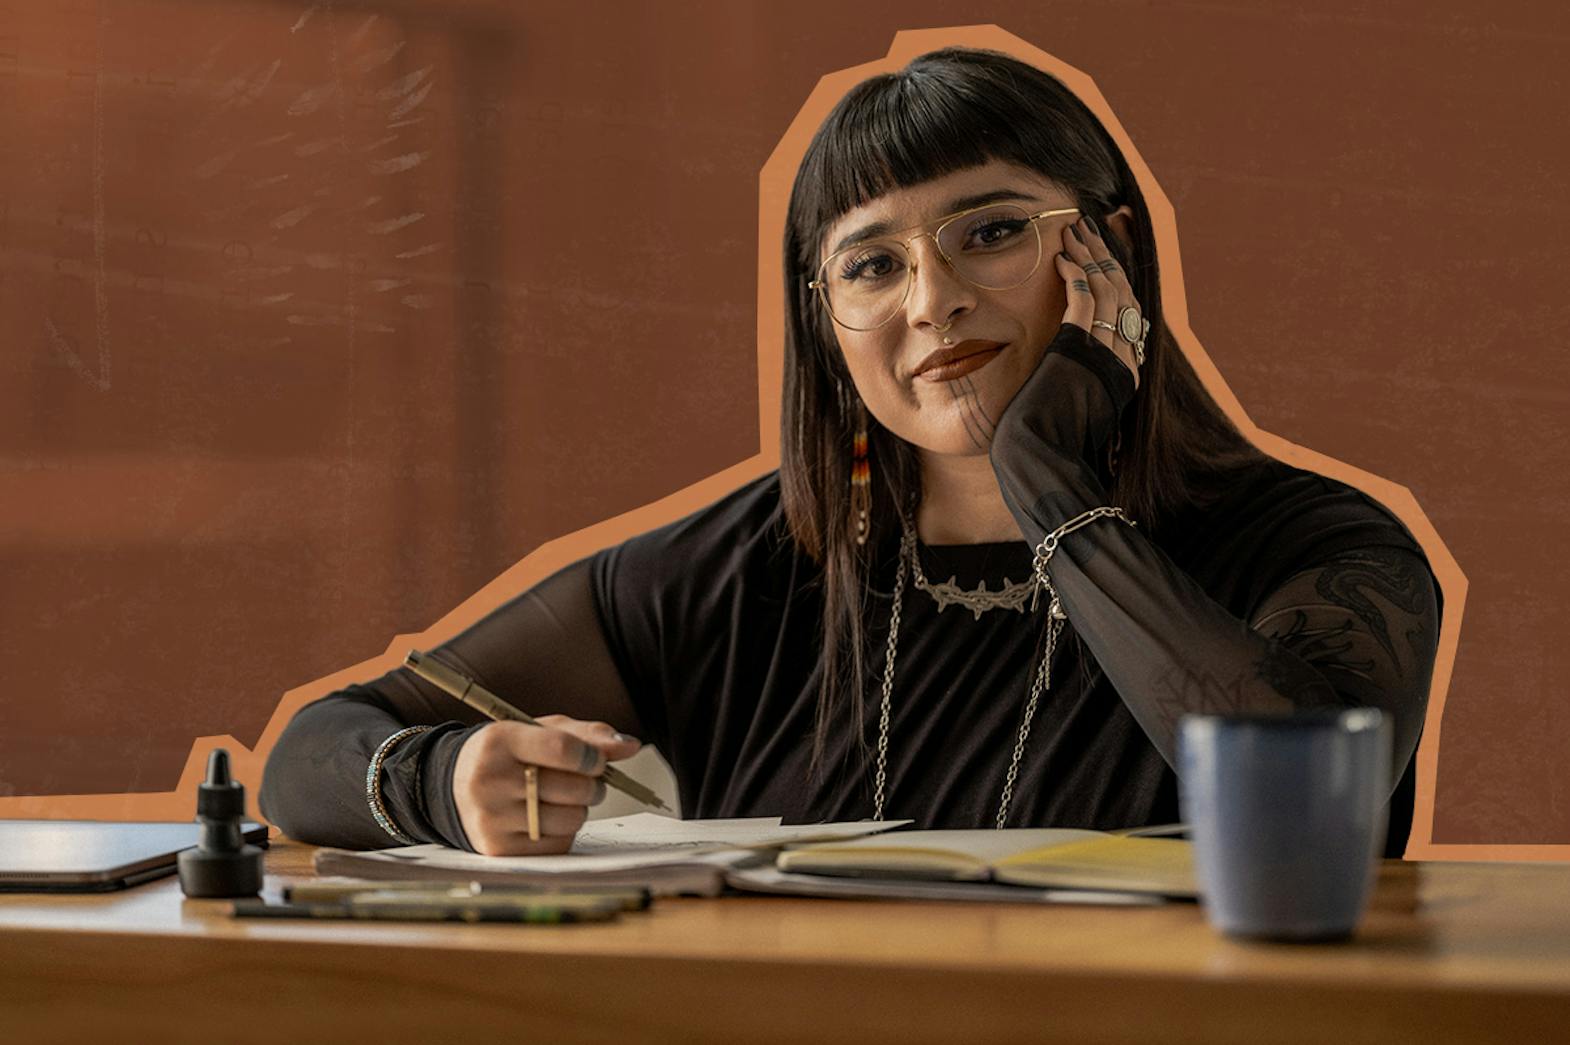 A non-binary Indigenous artist sitting at a desk drawing